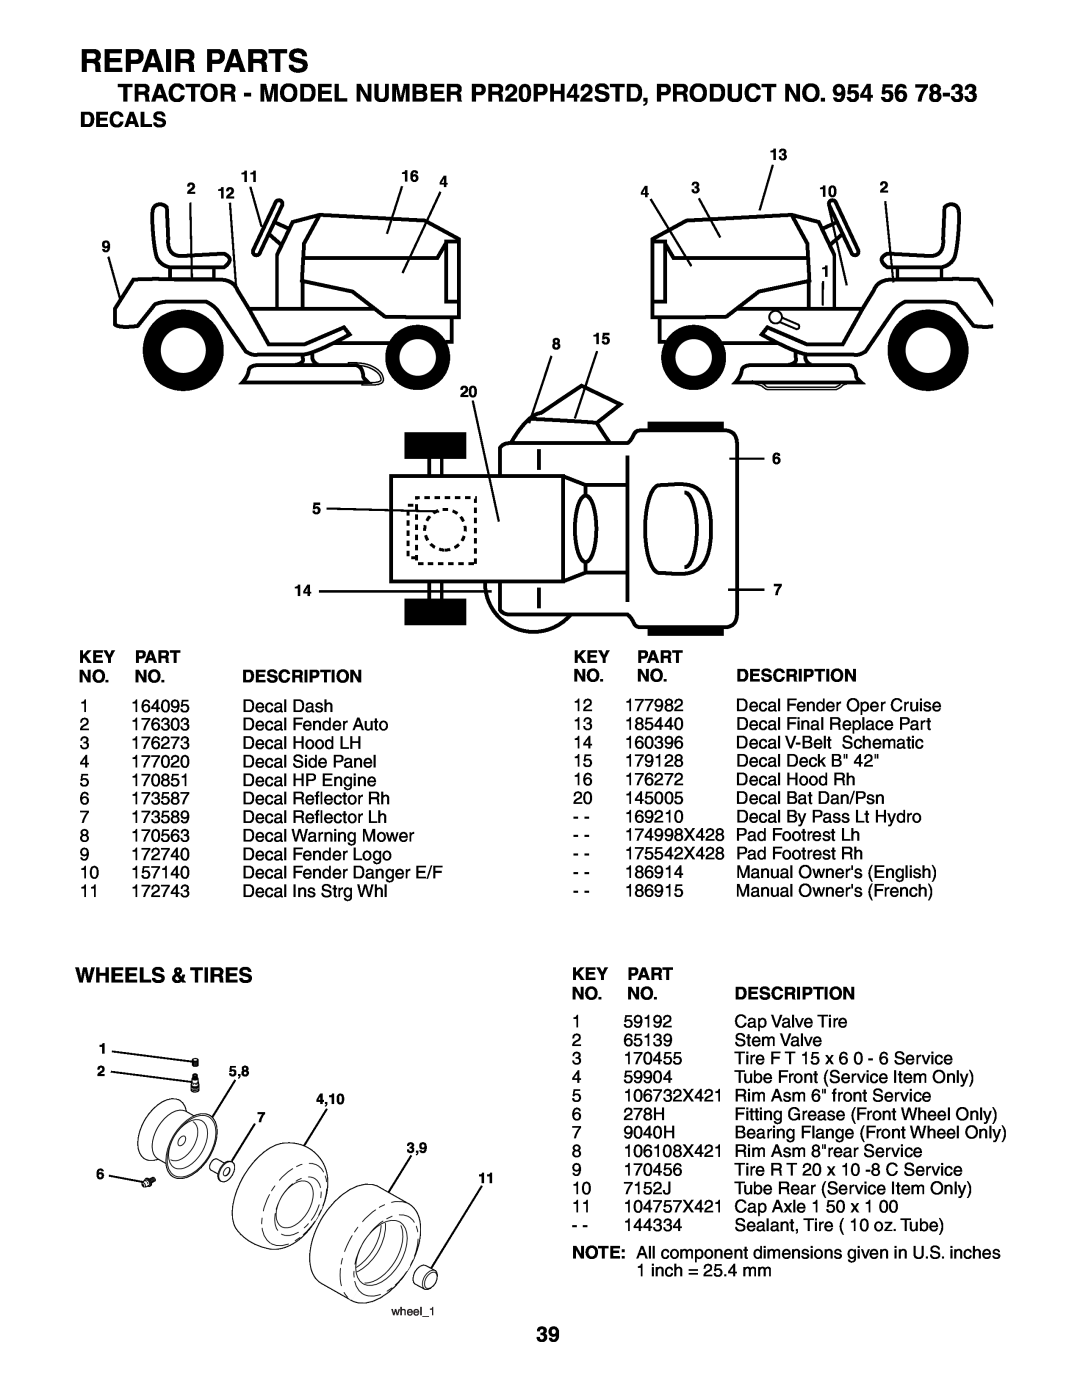 Poulan 186914 Decals, Wheels & Tires, Repair Parts, TRACTOR - MODEL NUMBER PR20PH42STD, PRODUCT NO. 954 56, 4,10 